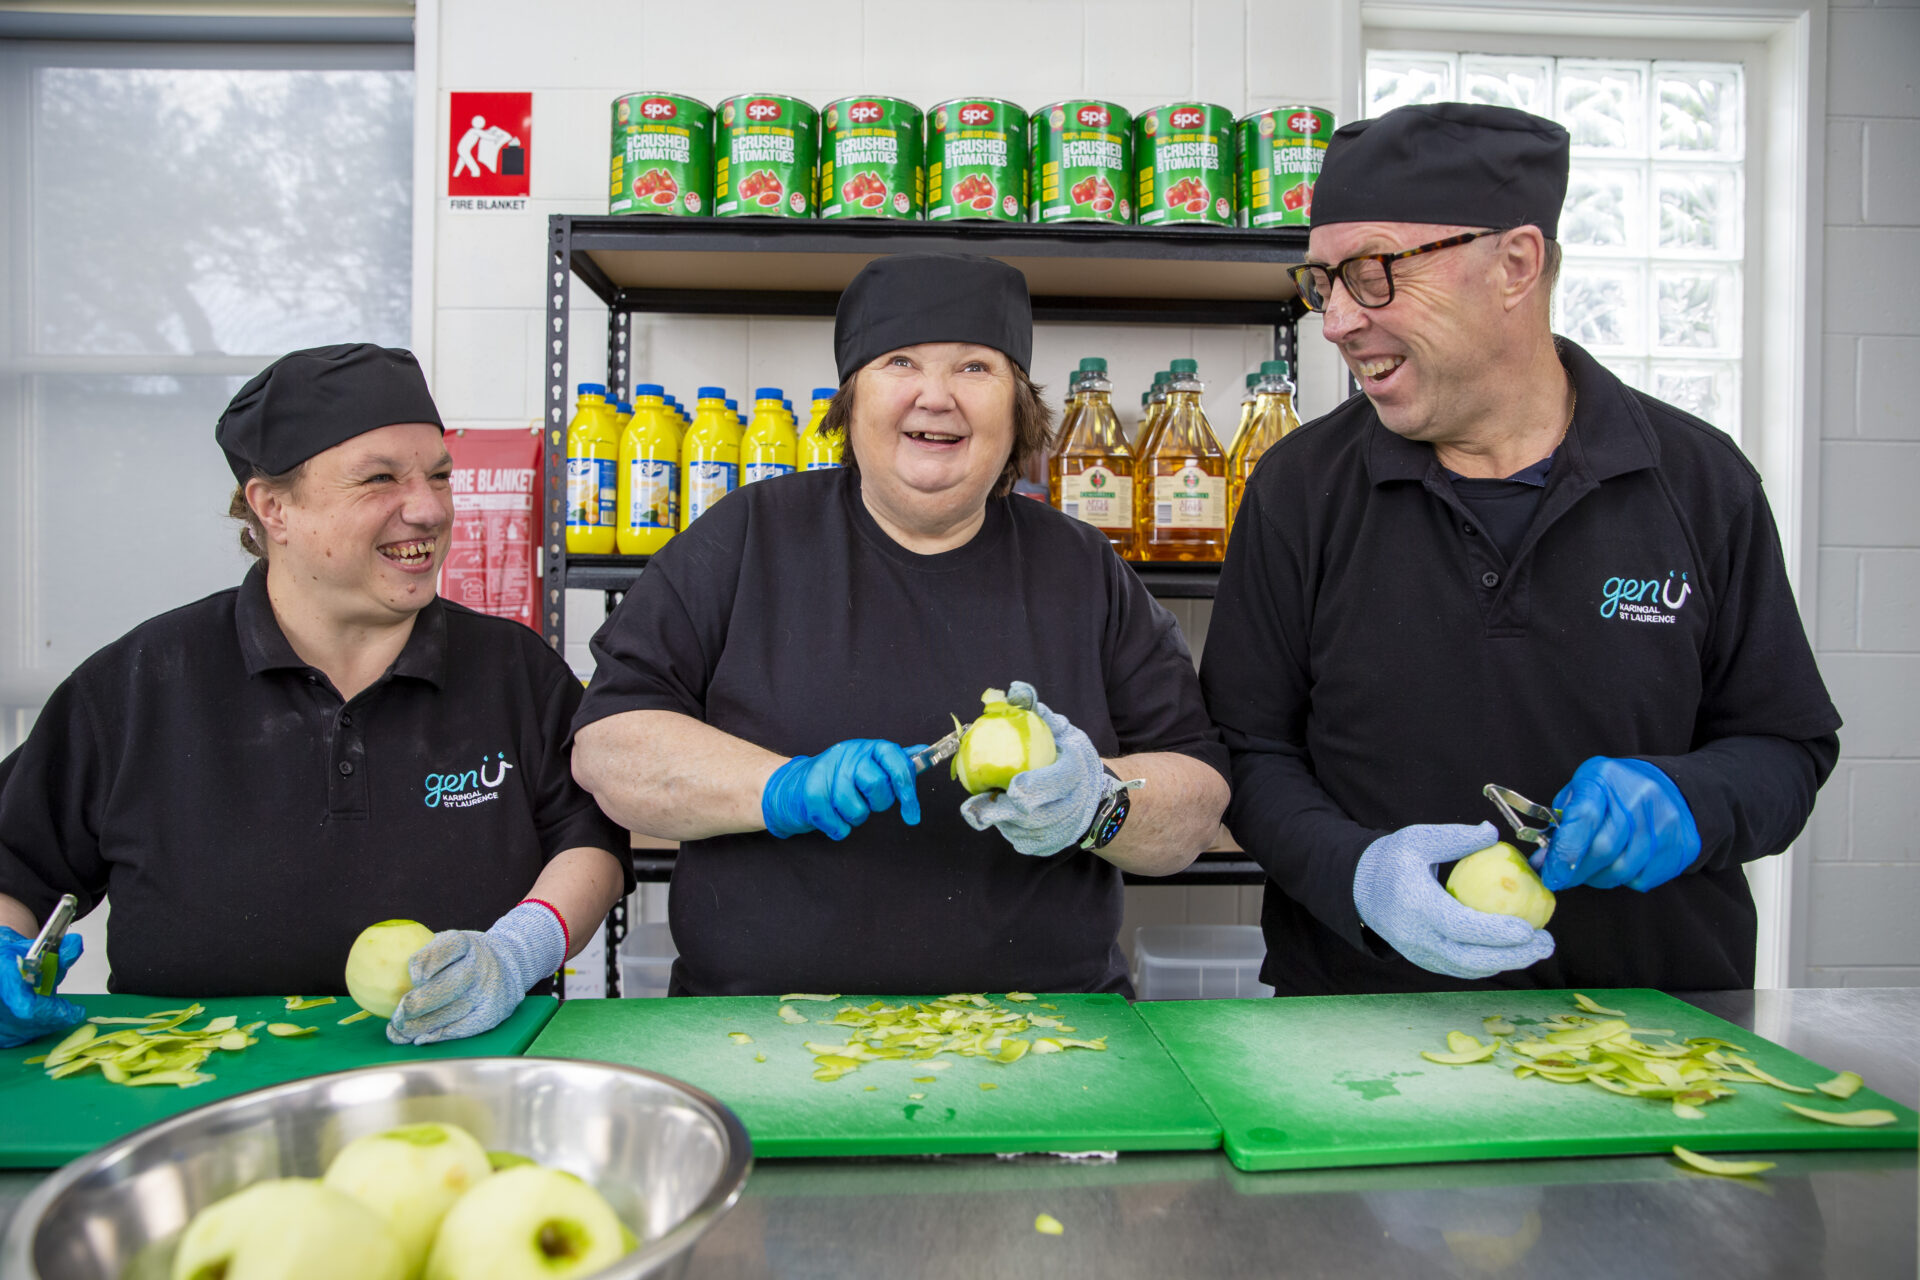 Kerrie is peeling apples with two other supported employees at the Seasons Kitchen in Rosebud. All supported employees are smiling and wearing black hats and blue gloves.